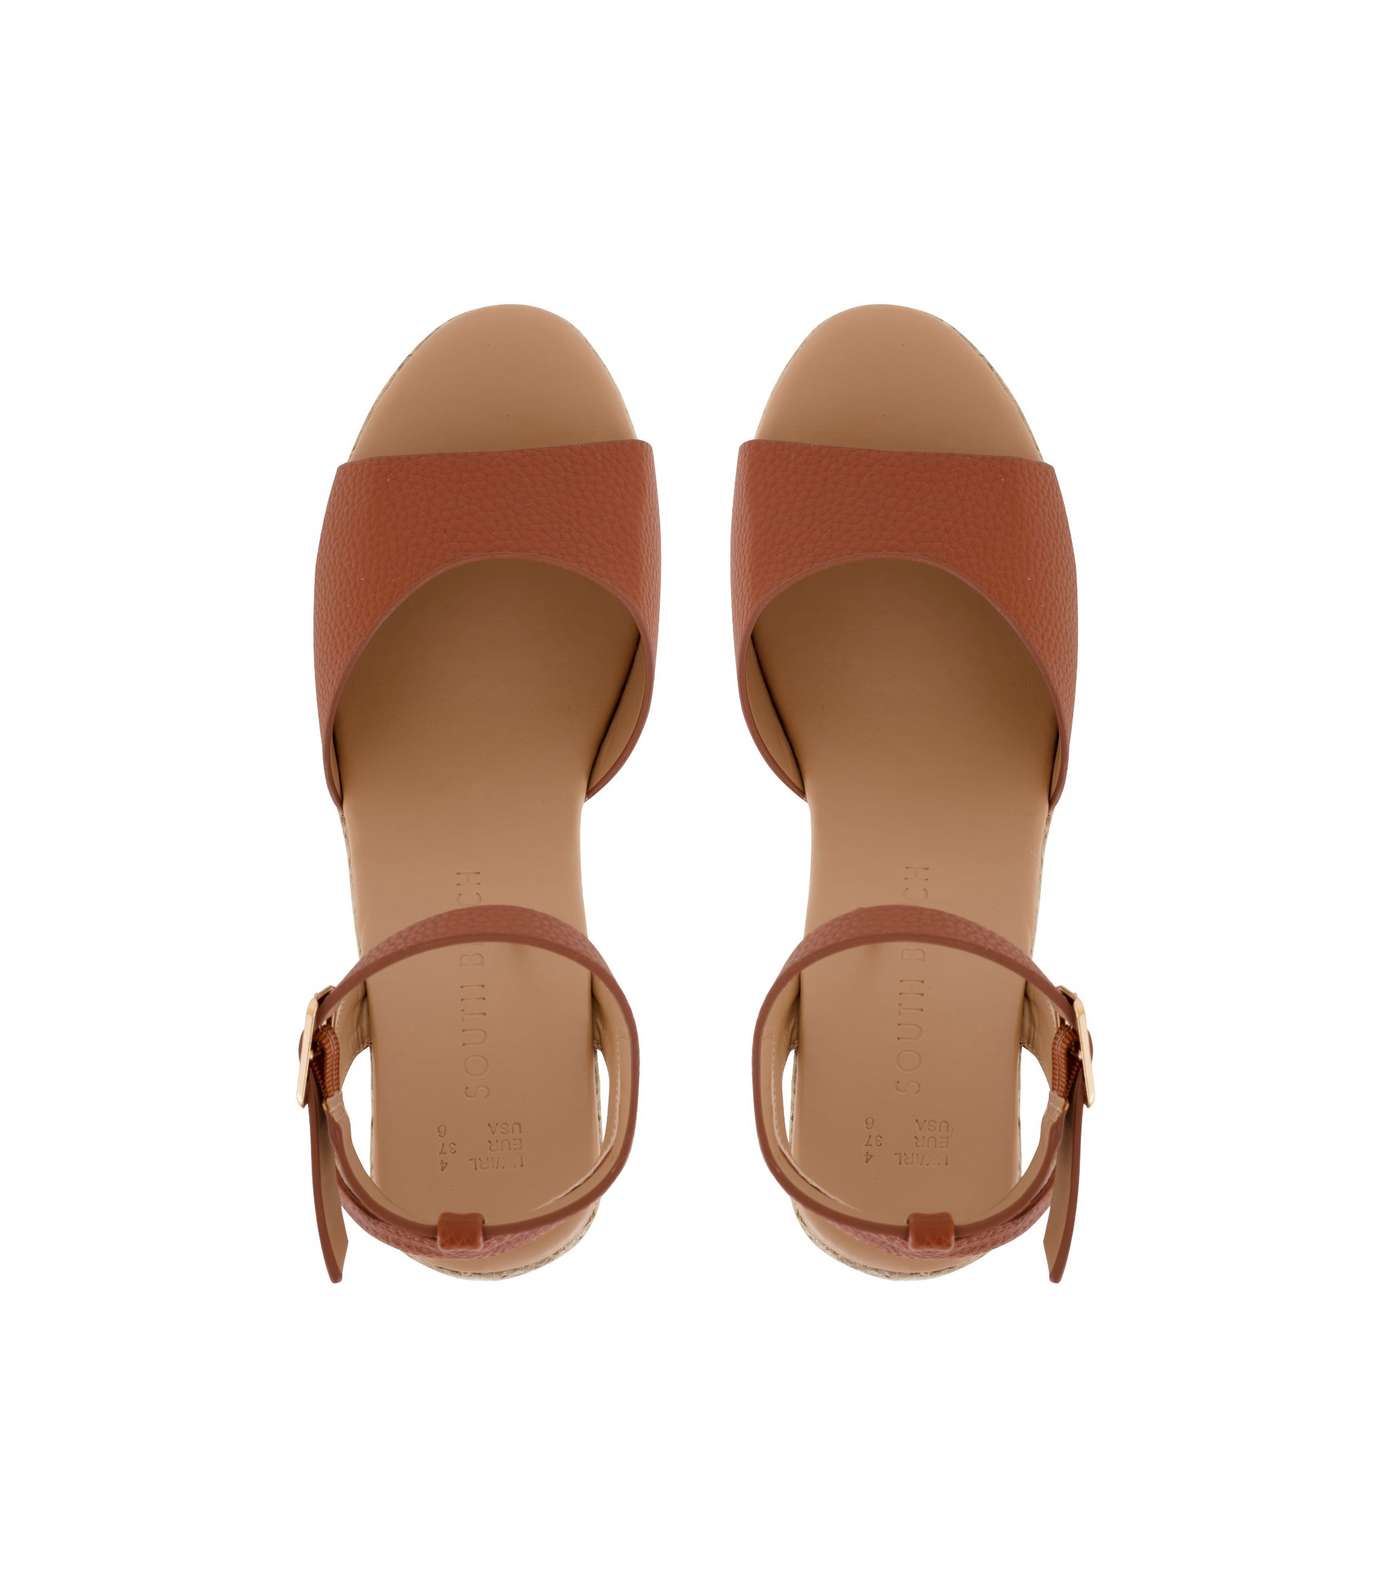 South Beach Tan Leather-Look Espadrille Wedge Sandals Image 3